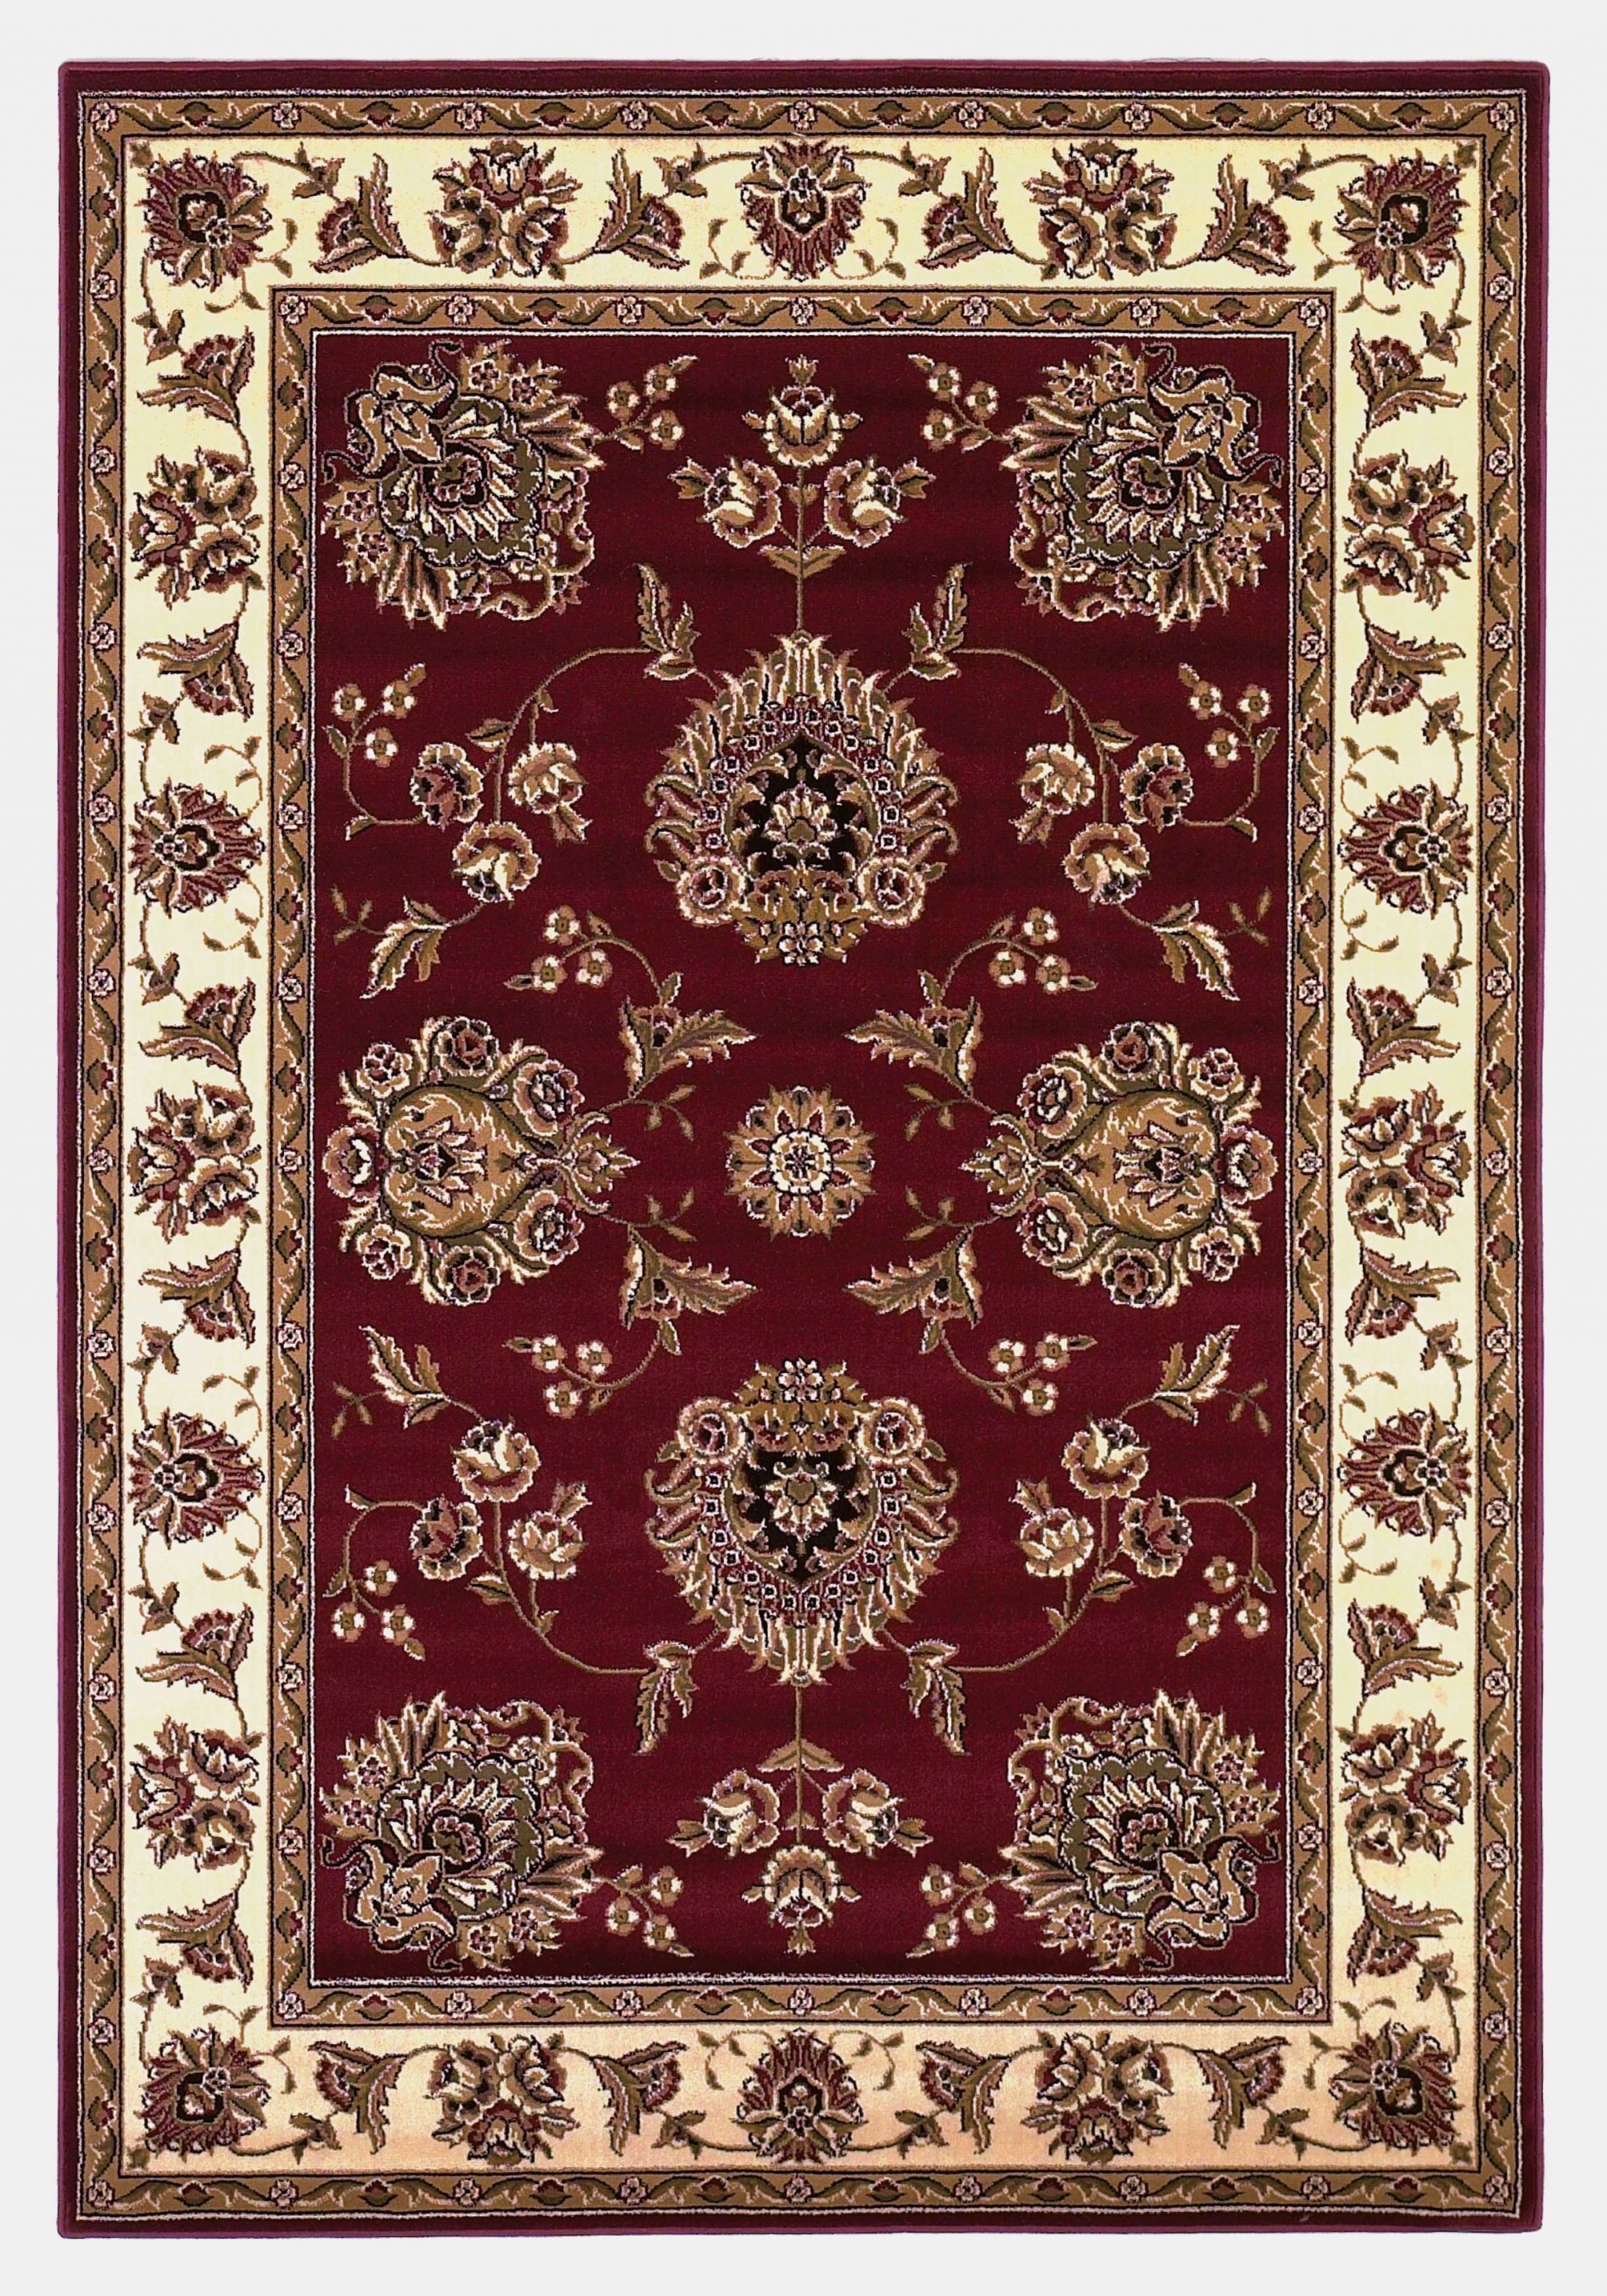 2' X 3' Red And Ivory Floral Area Rug-353247-1